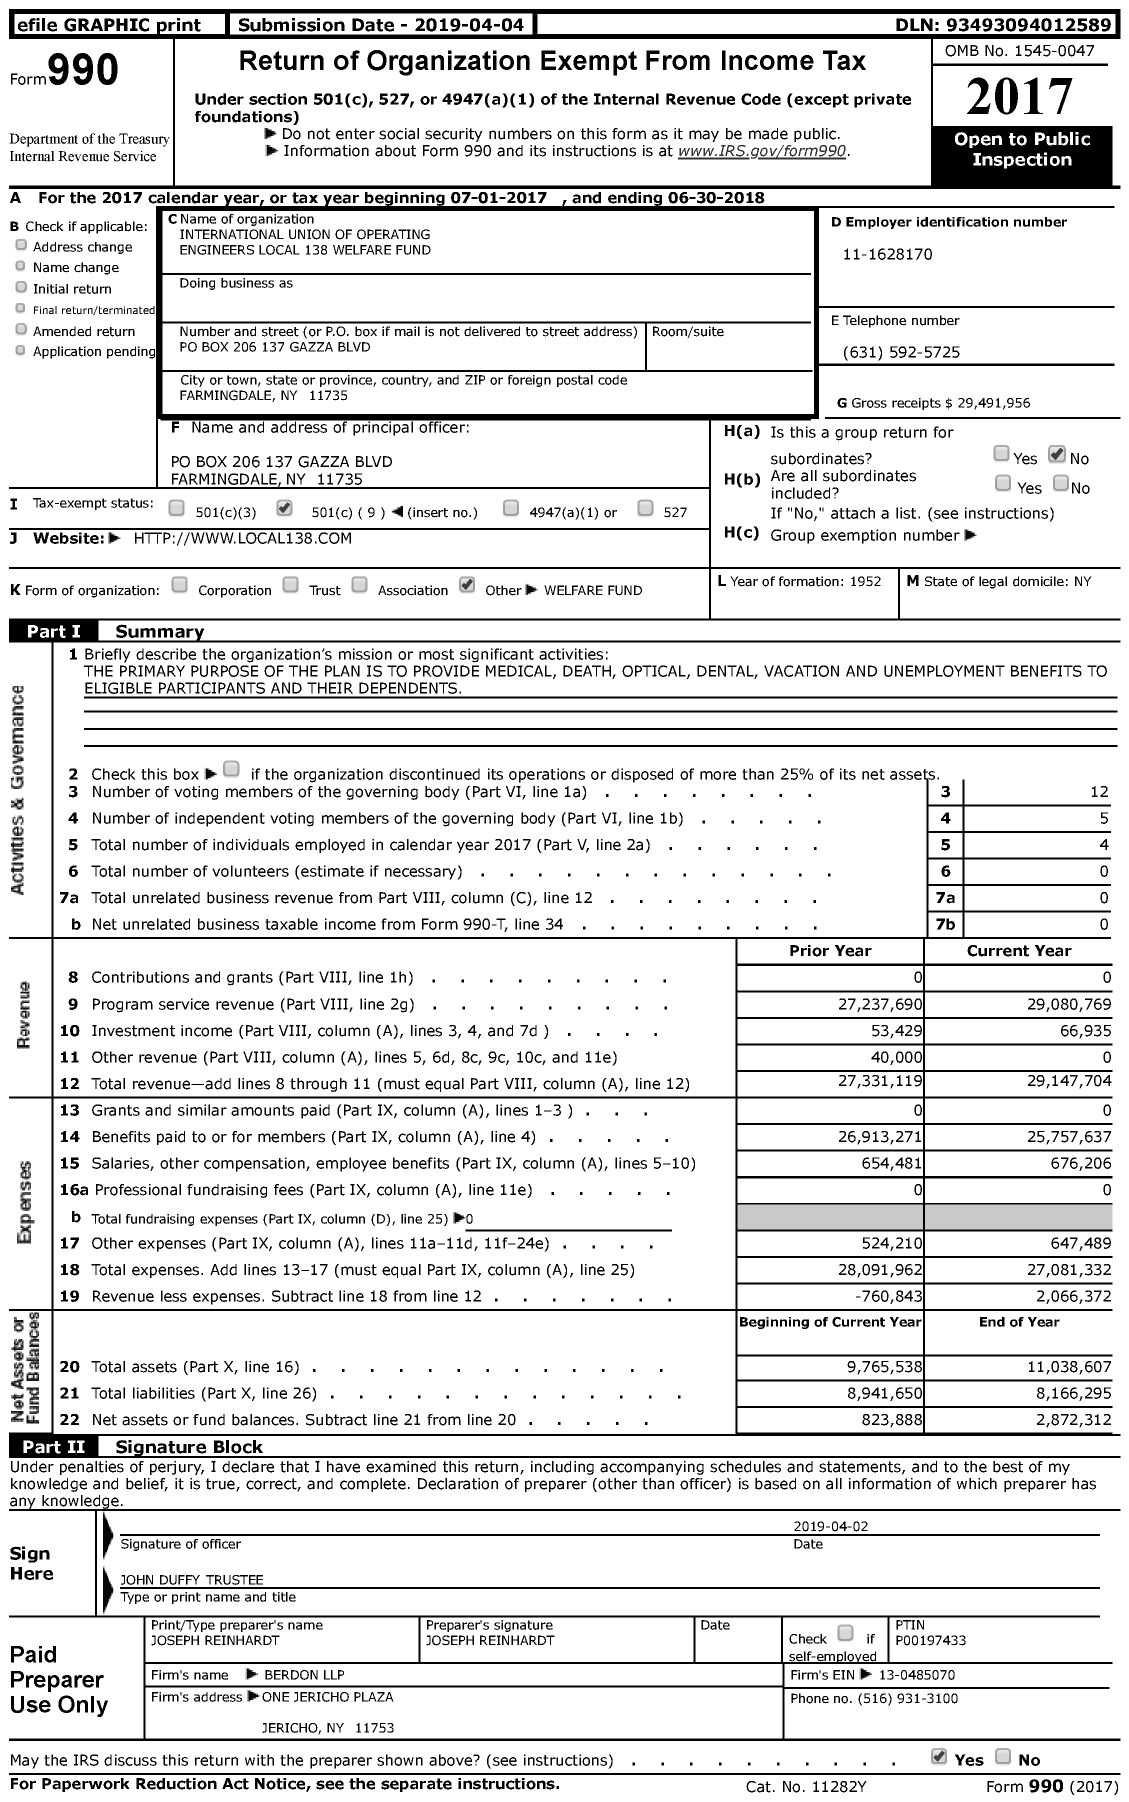 Image of first page of 2017 Form 990 for International Union of Operating Engineers Local 138 Welfare Fund